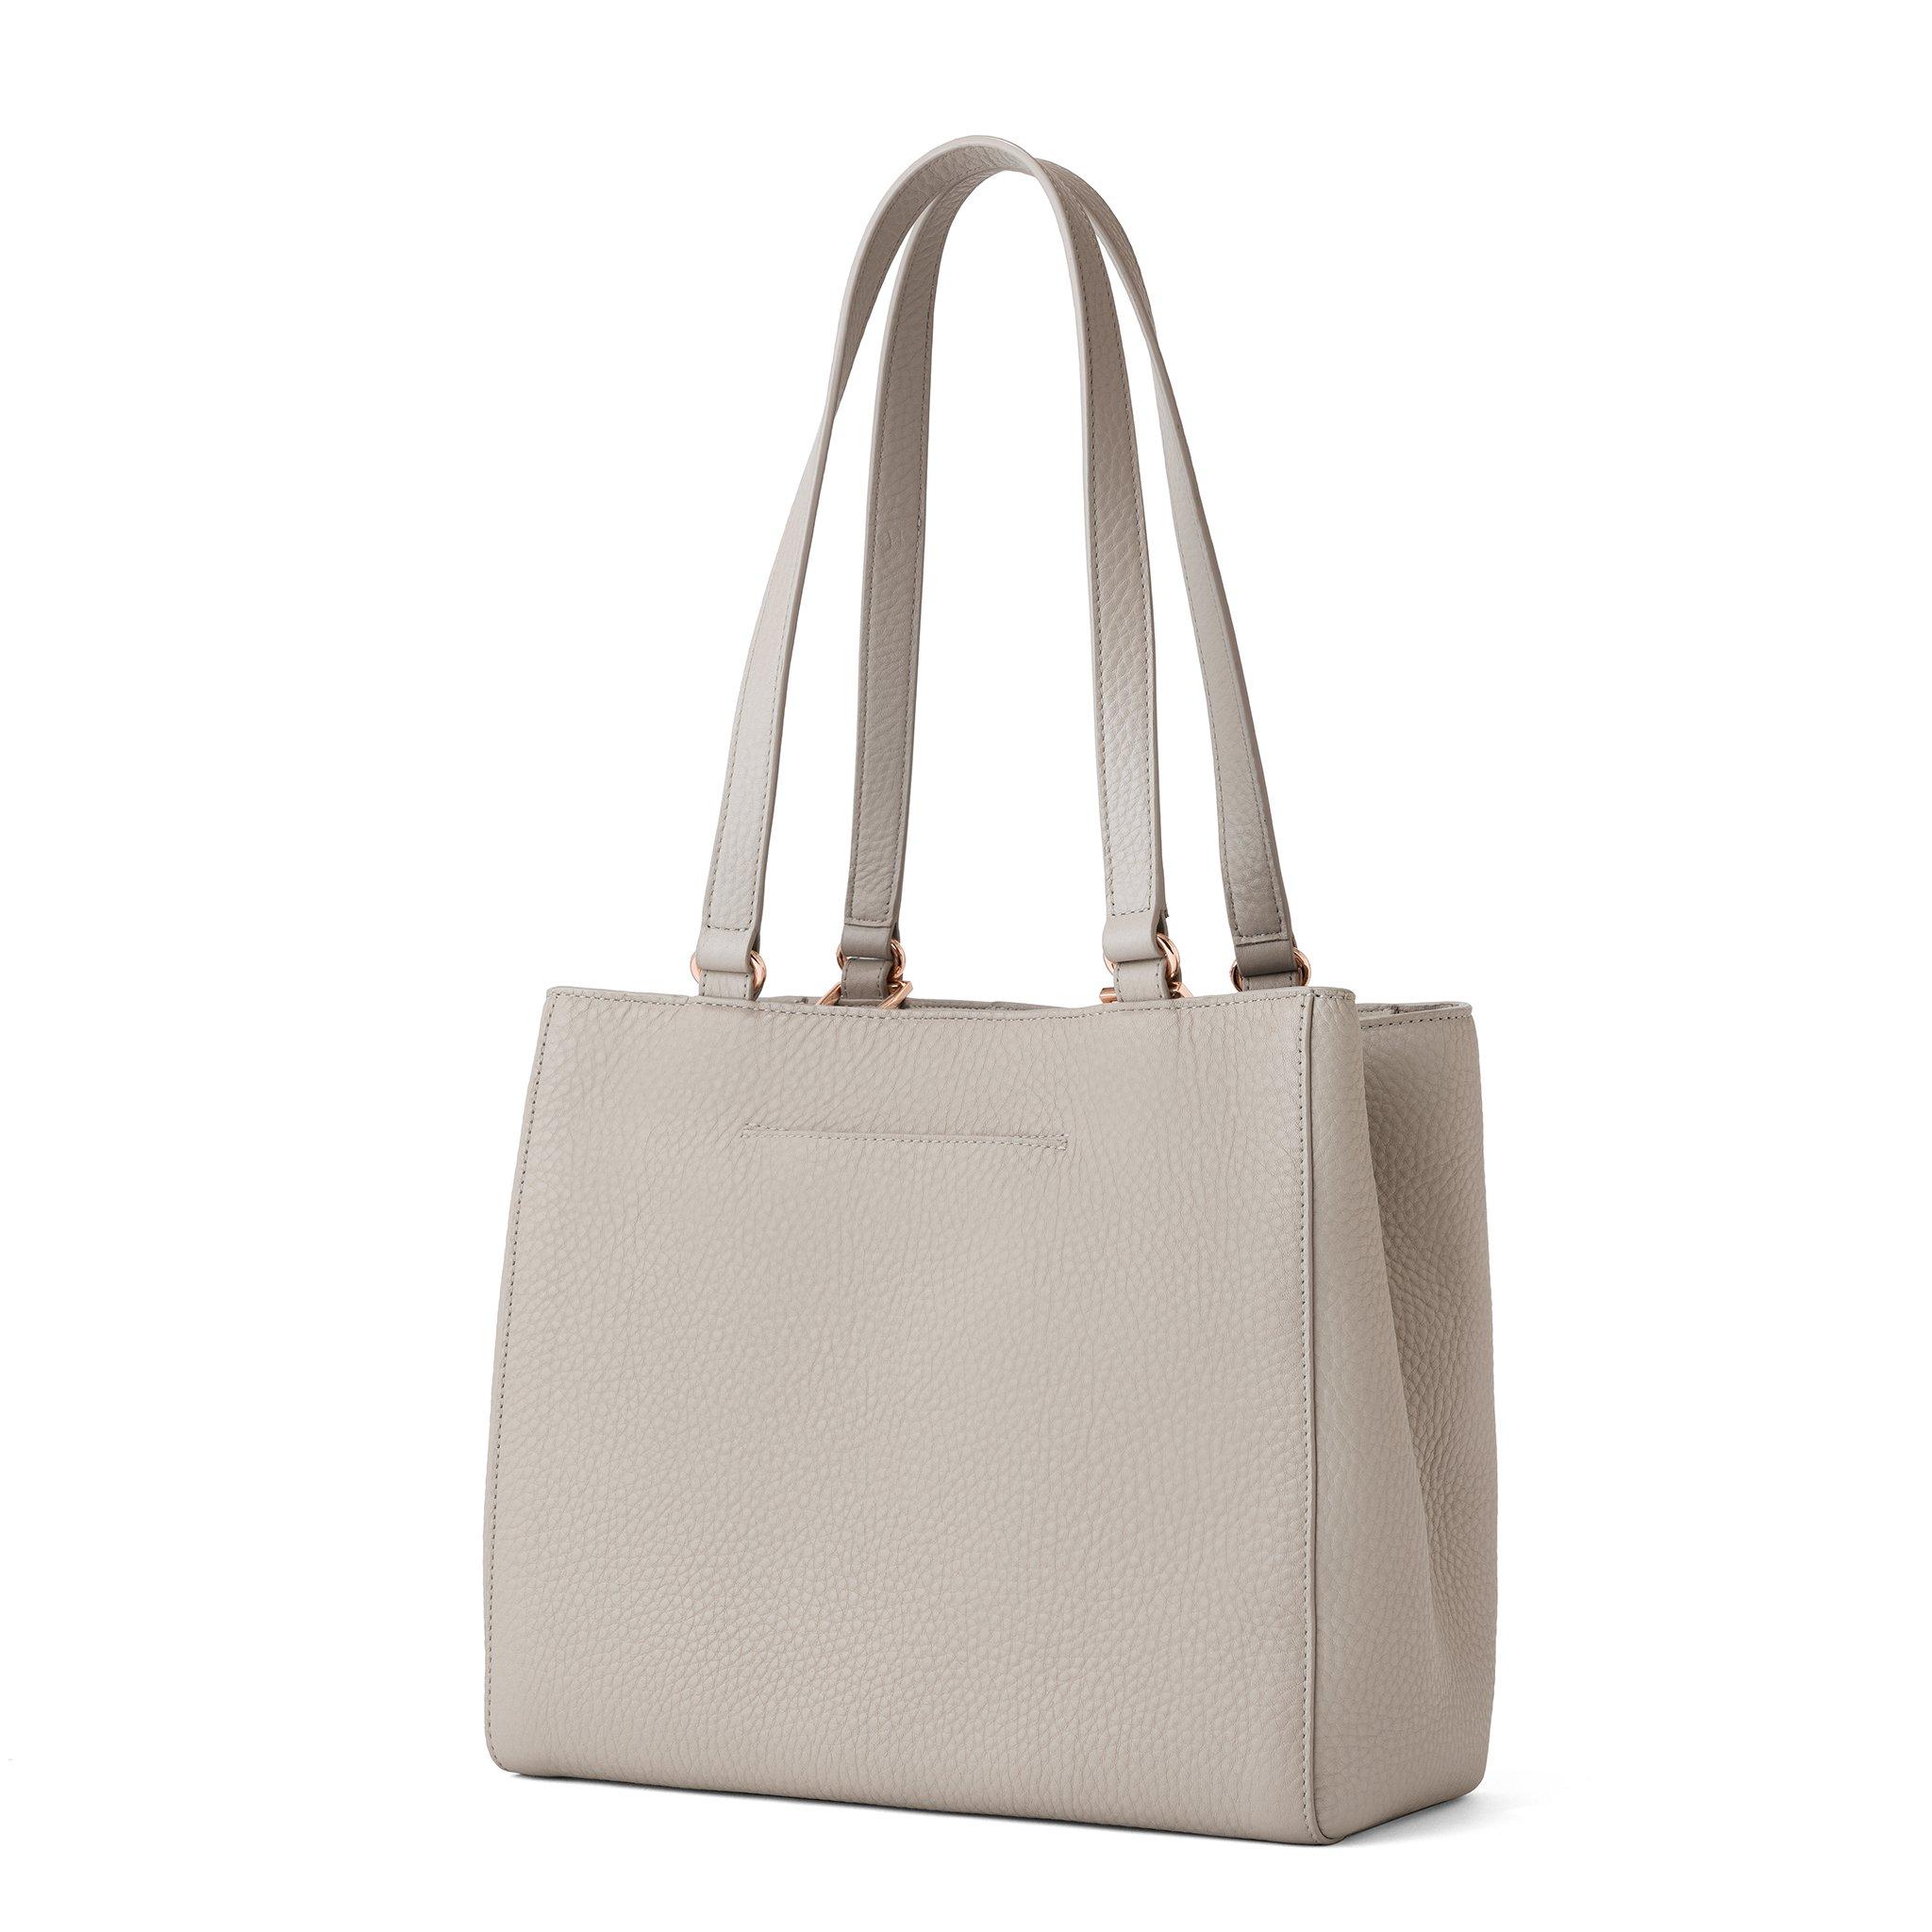 Dagne Dover Leather Allyn Tote In Bone, Small - Lyst